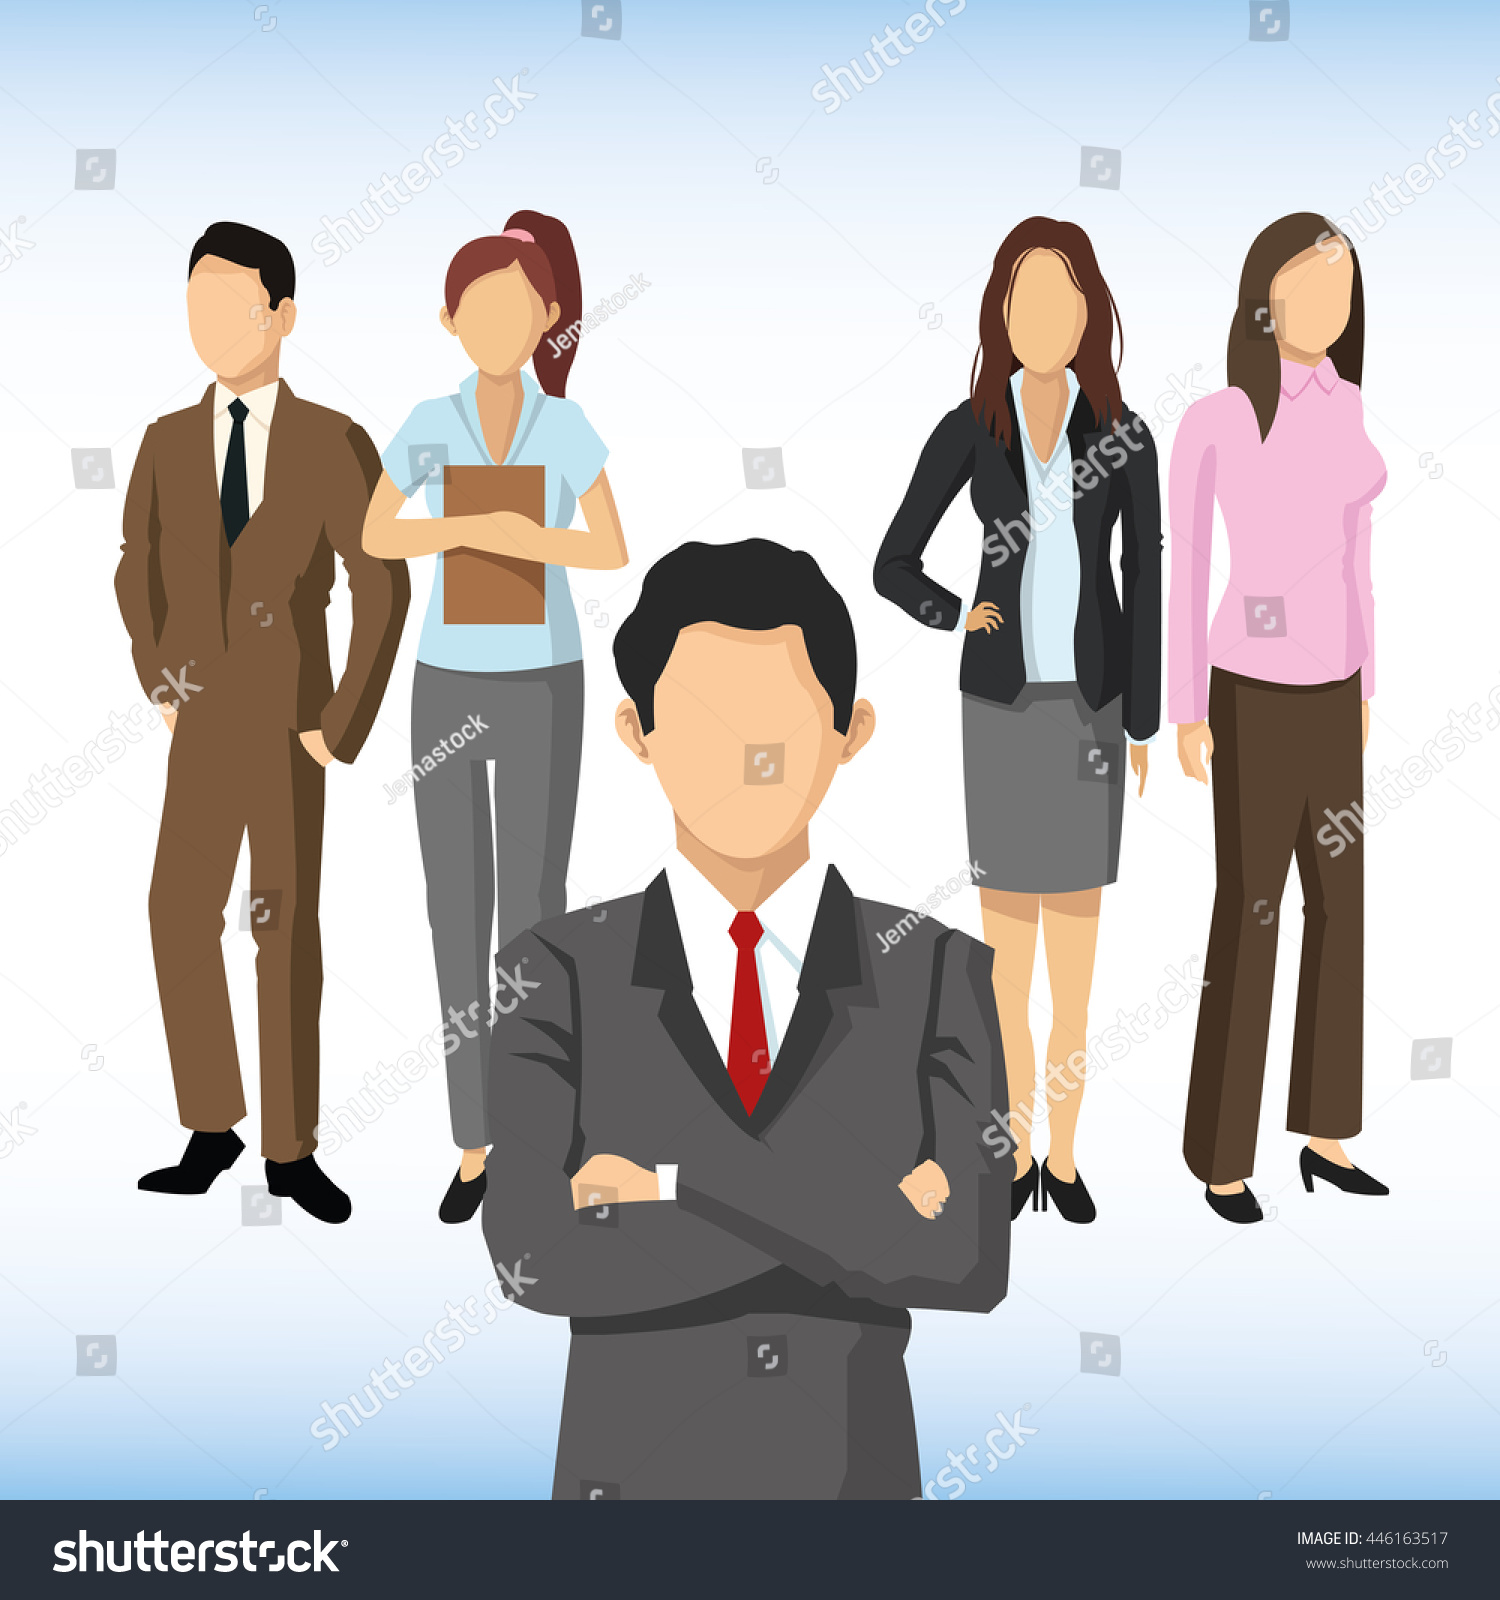 Woman Man Avatar Icon Businesspeople Design Stock Vector (Royalty Free ...